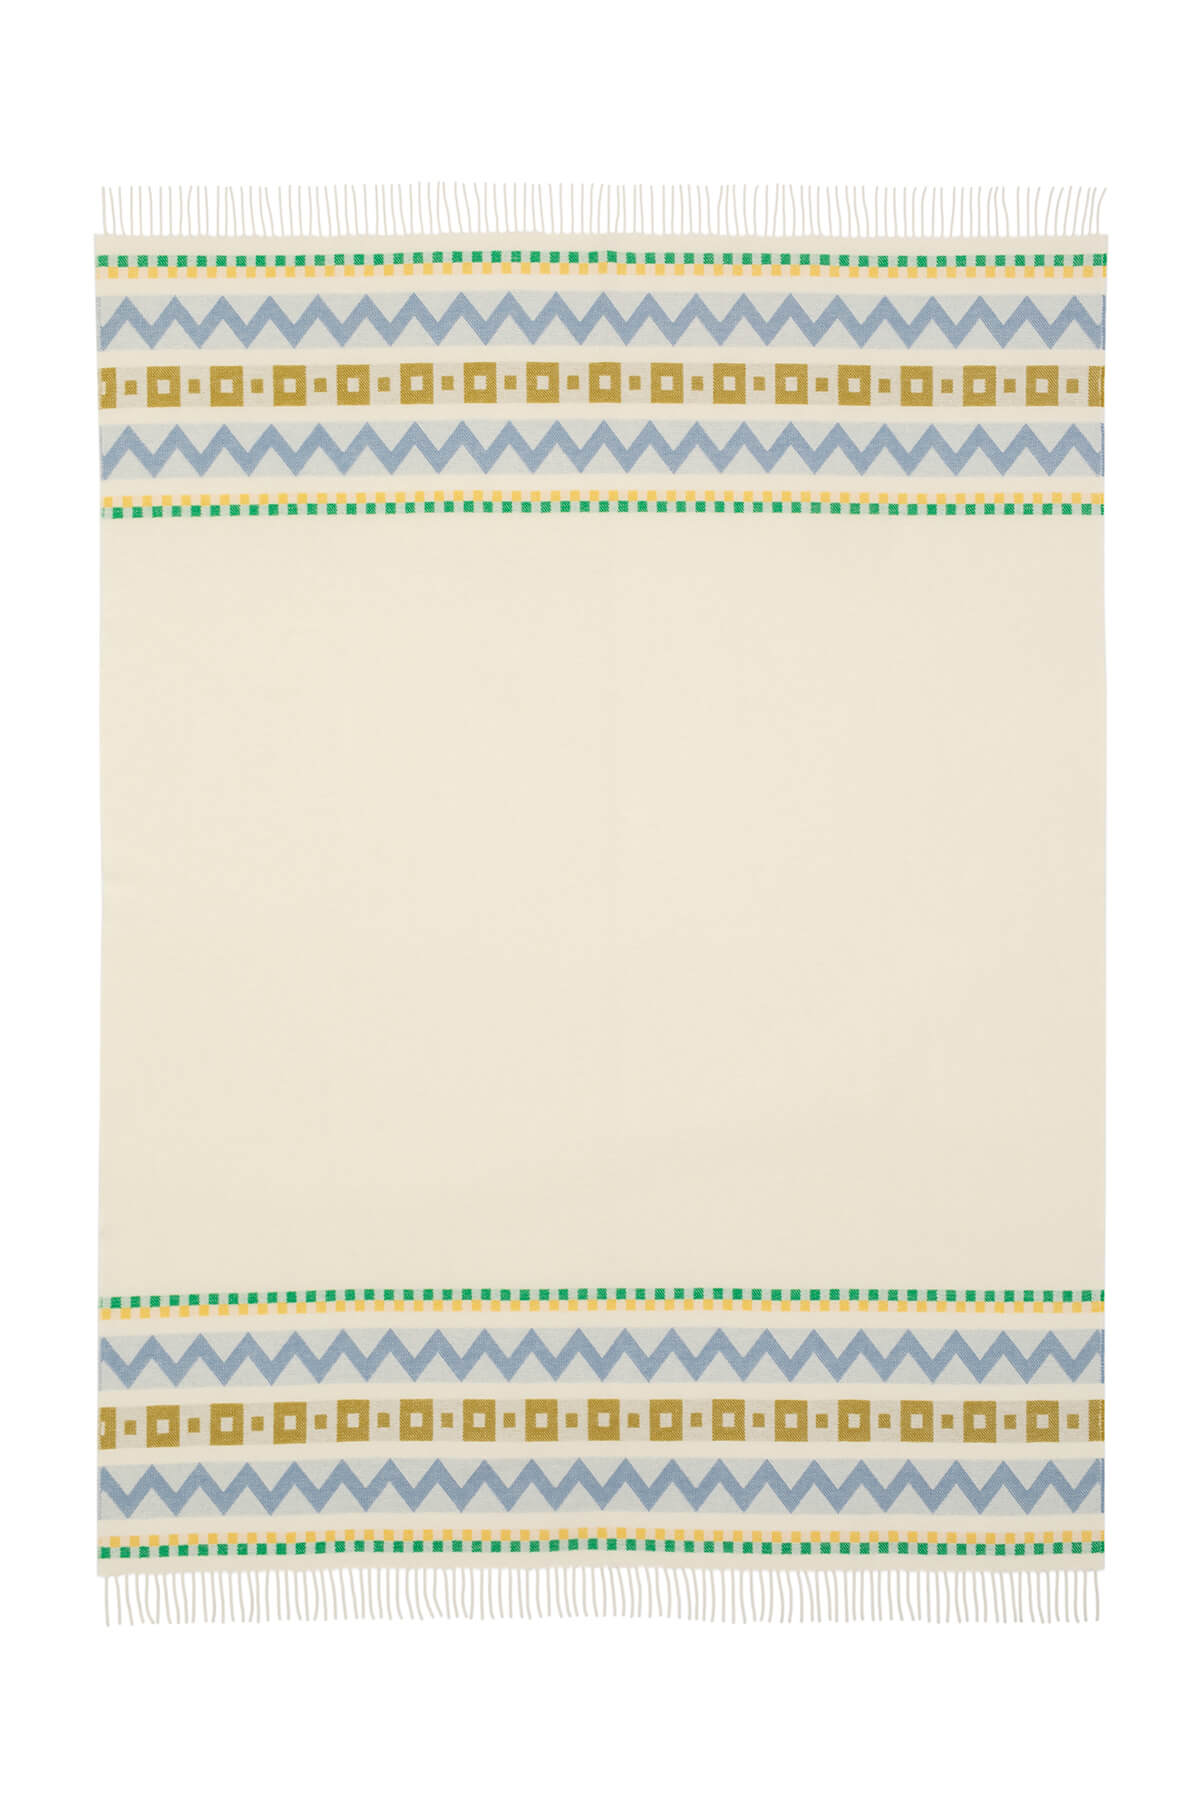 Flat of Johnstons of Elgin Children's Zig Zag Blanket in shades of blue, green, and cream on white background WB002334RU7276ONE